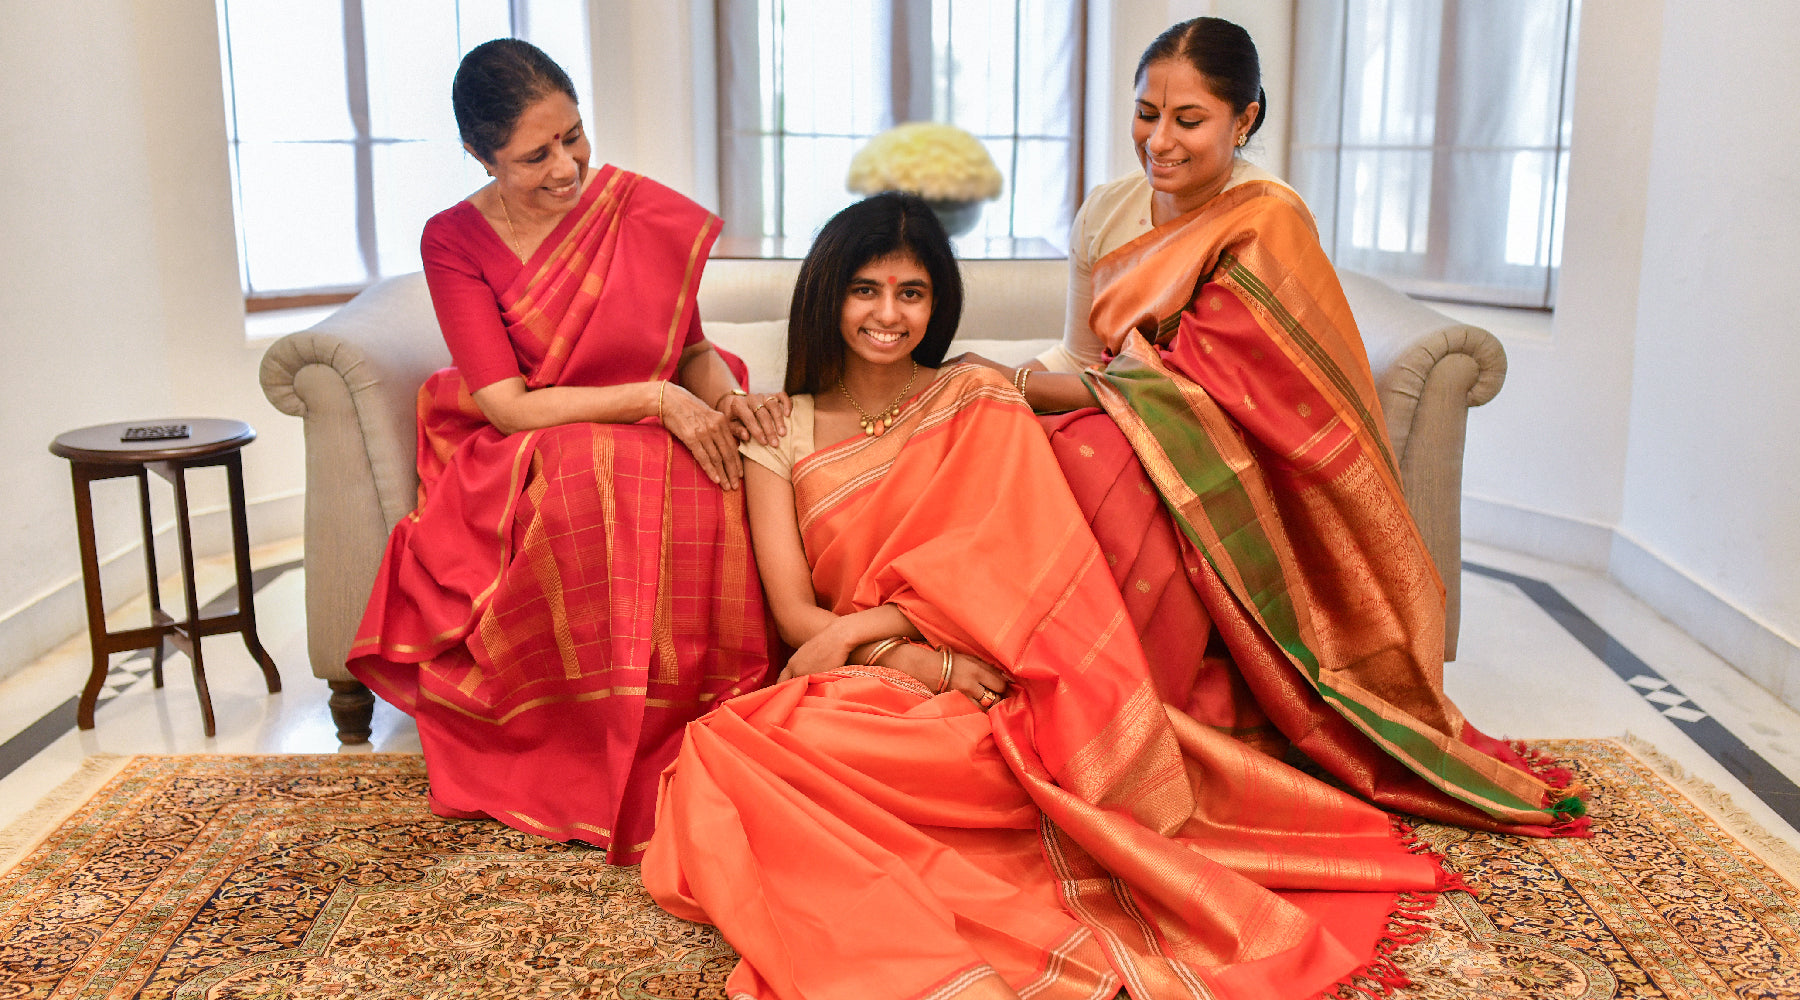 KANAKAVALLI VIGNETTES : The Mothers' Day Special - Mothers & Daughters